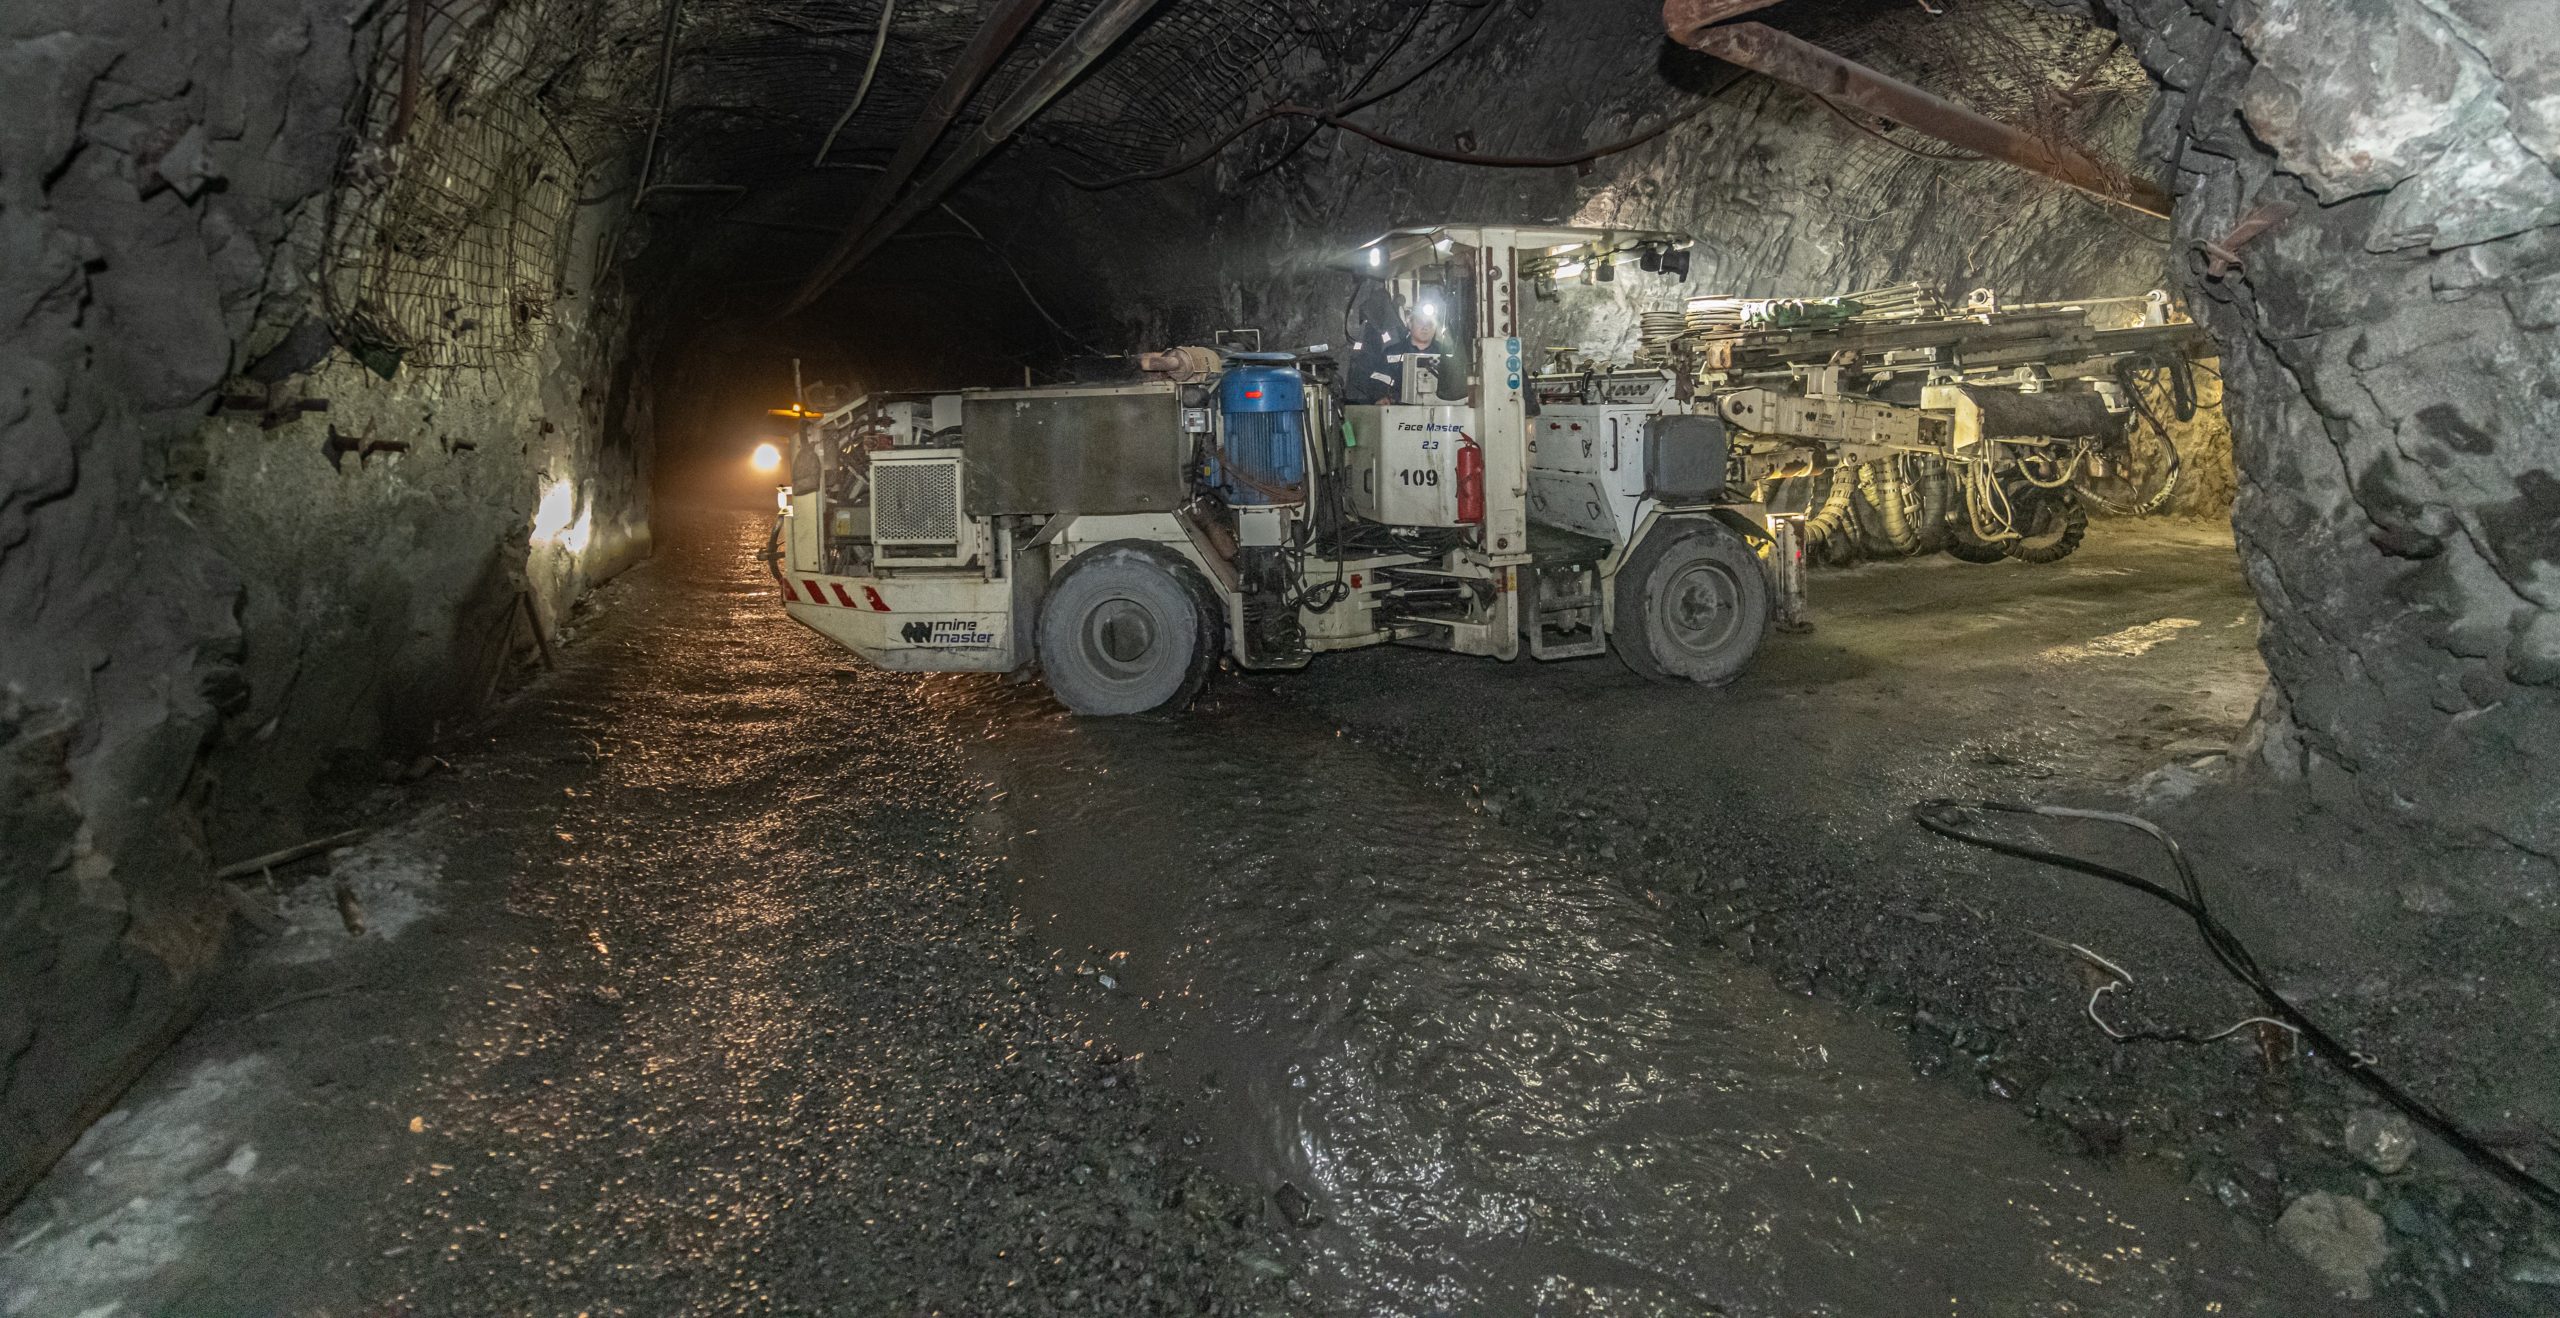 Mine Master Reports Successful Testing With Resultant Major Order For